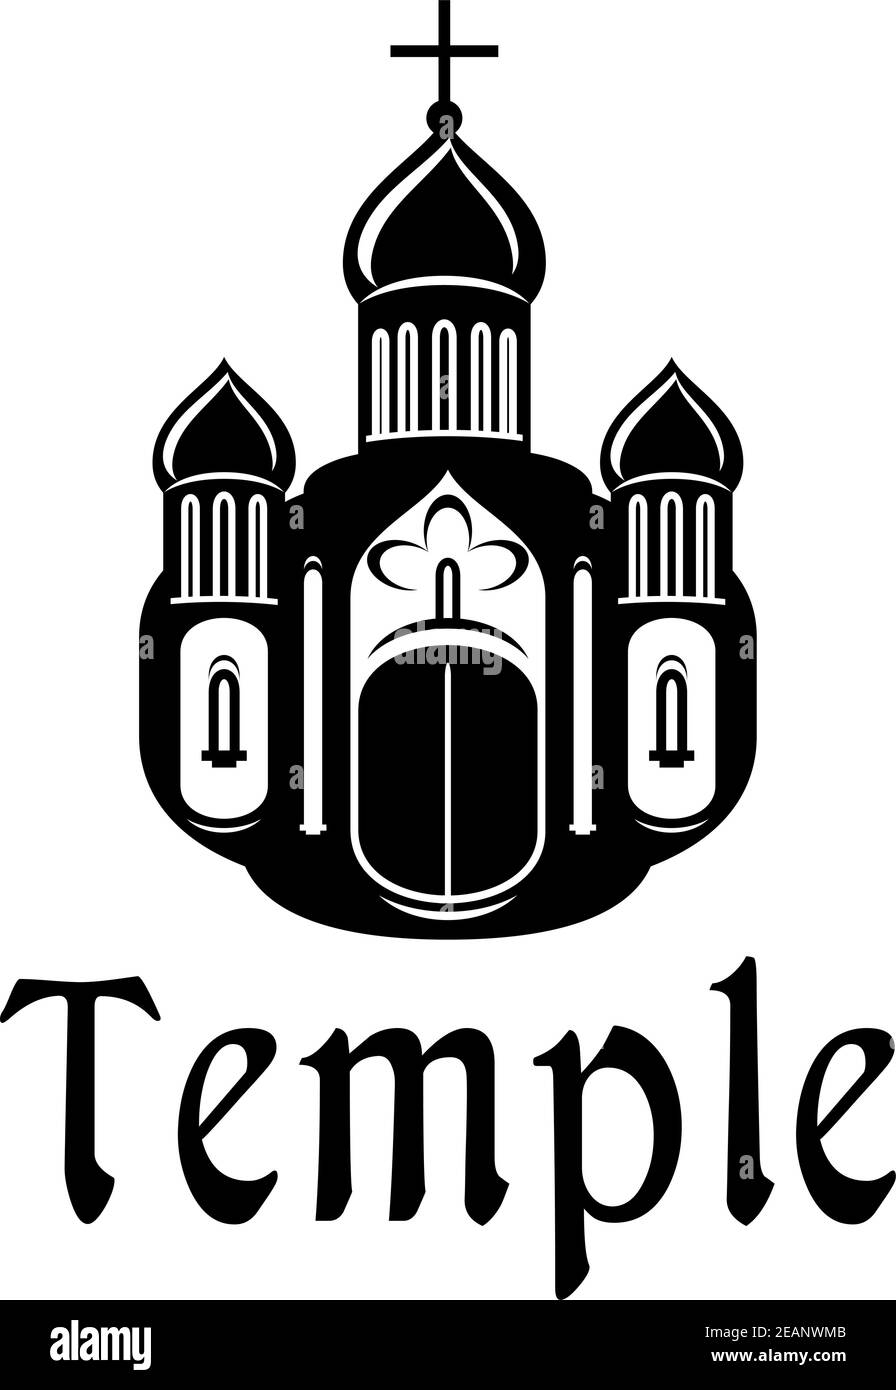 Black and white silhouette temple or church icon with the front facade with three onion domes, windows and the text,  suitable for religious and chris Stock Vector